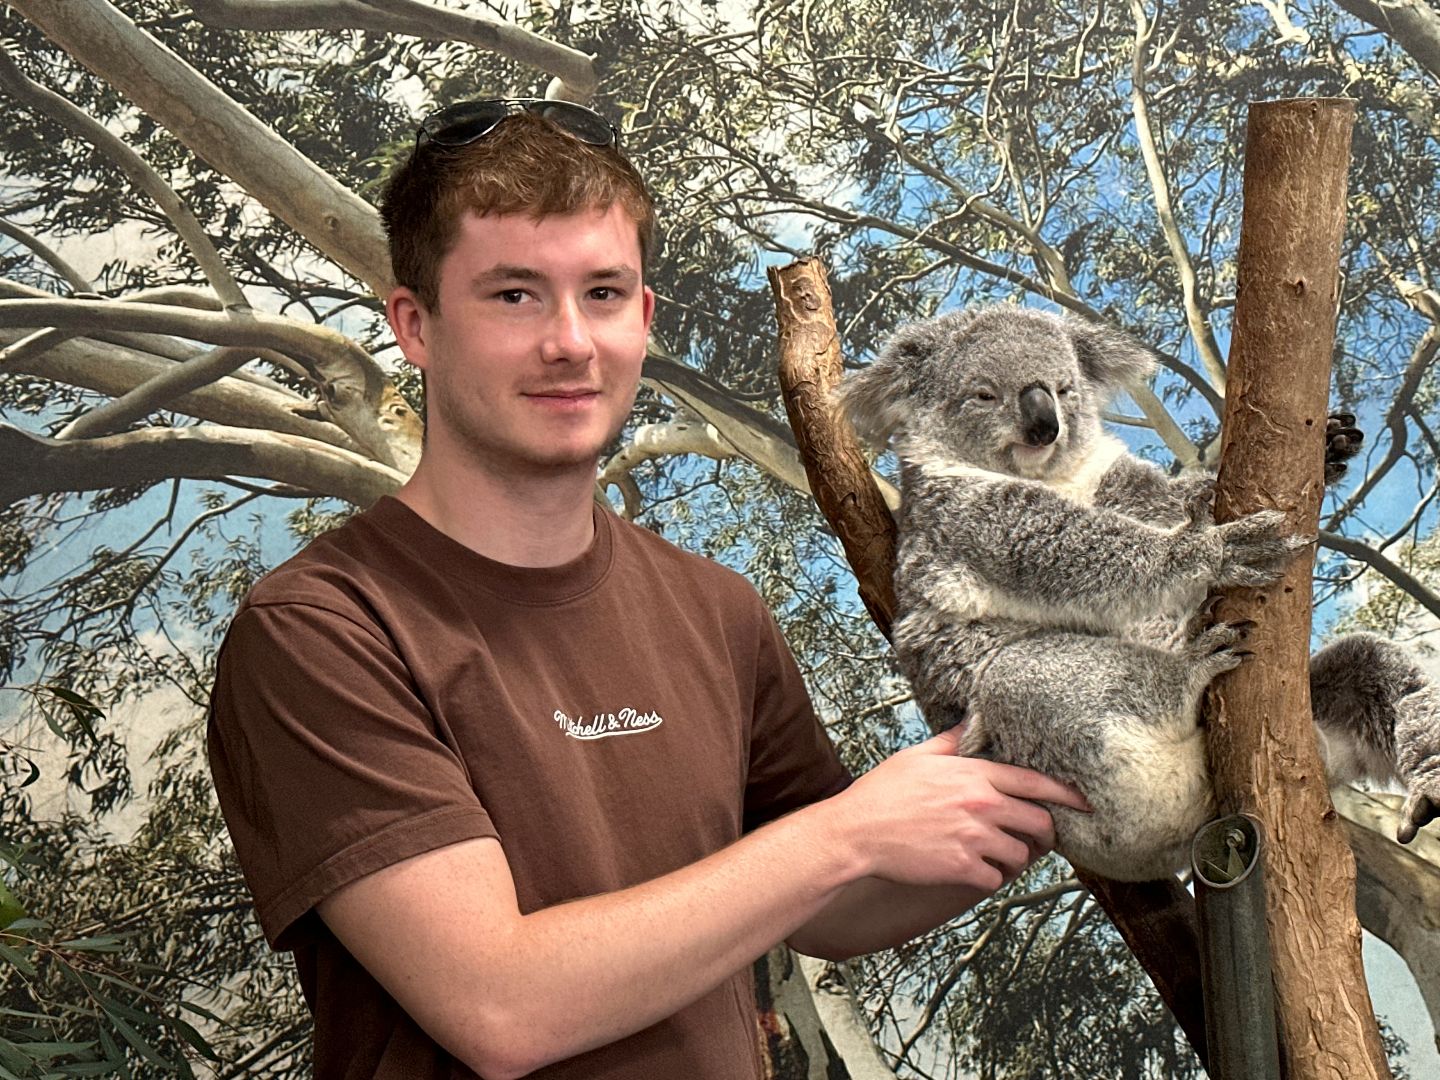 David standing next to a koala in a tree